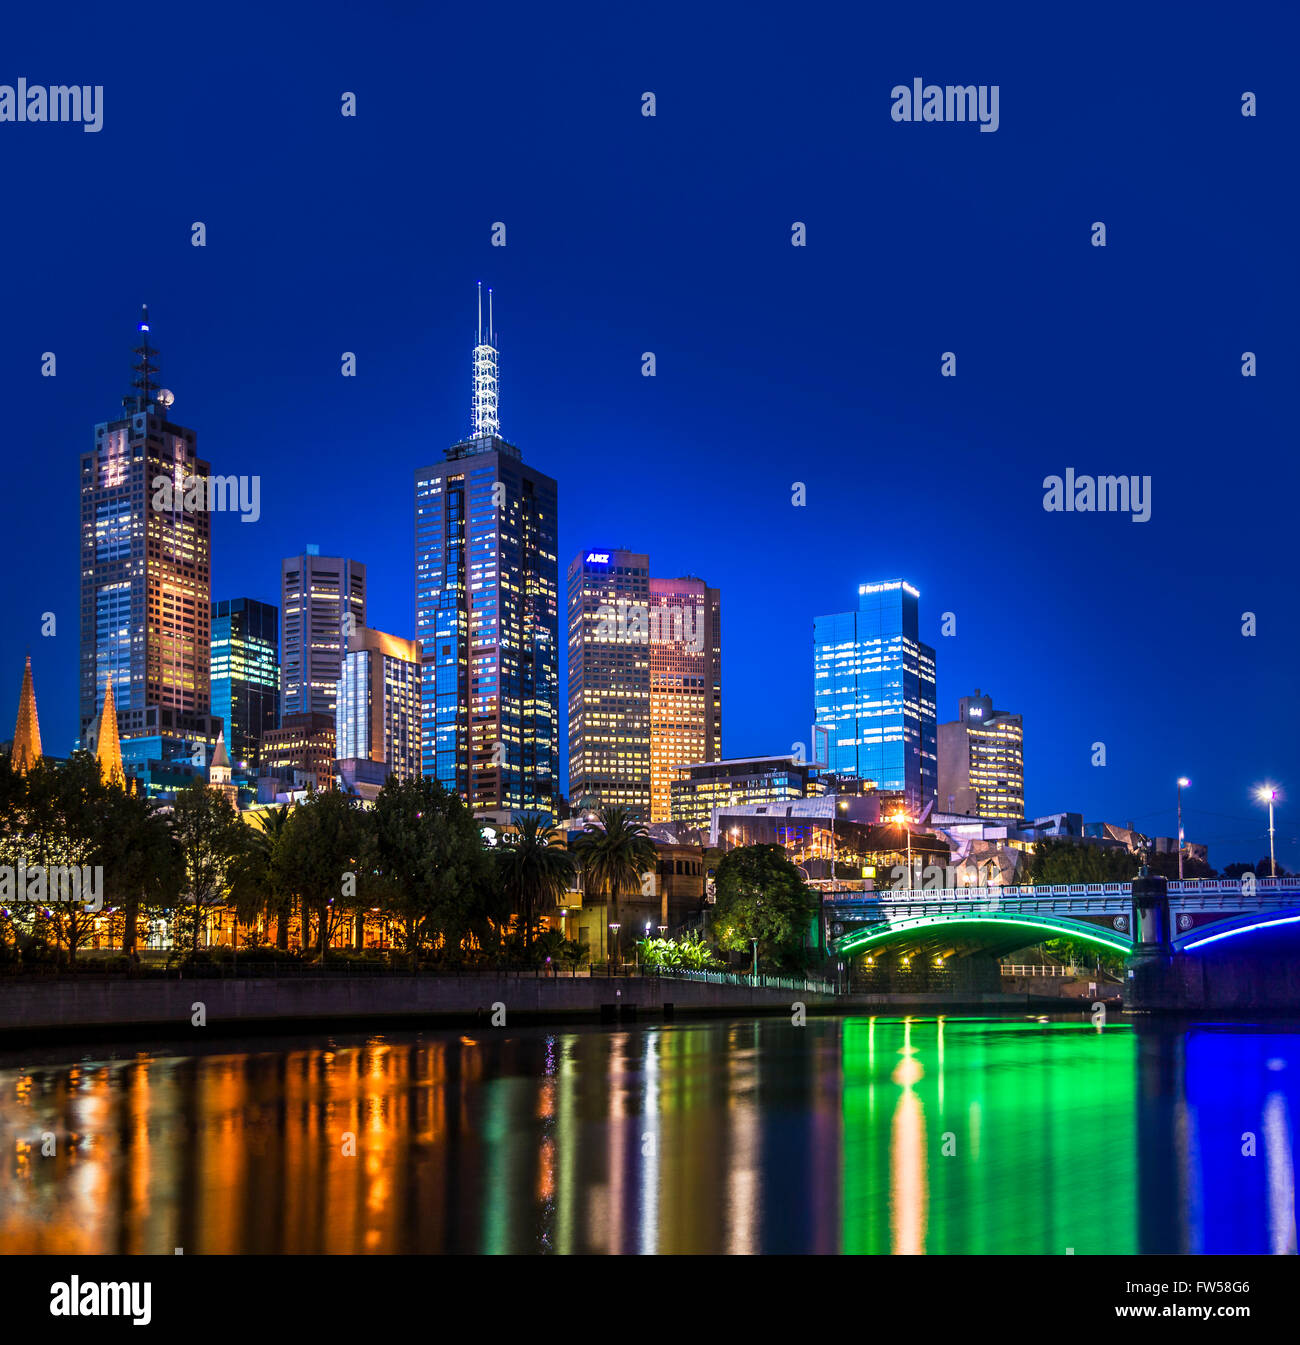 Illuminated city skyline at night of Melbourne CBD. A view from Yarra River on the southbank side of the city, looking up toward Princes Bridge Stock Photo